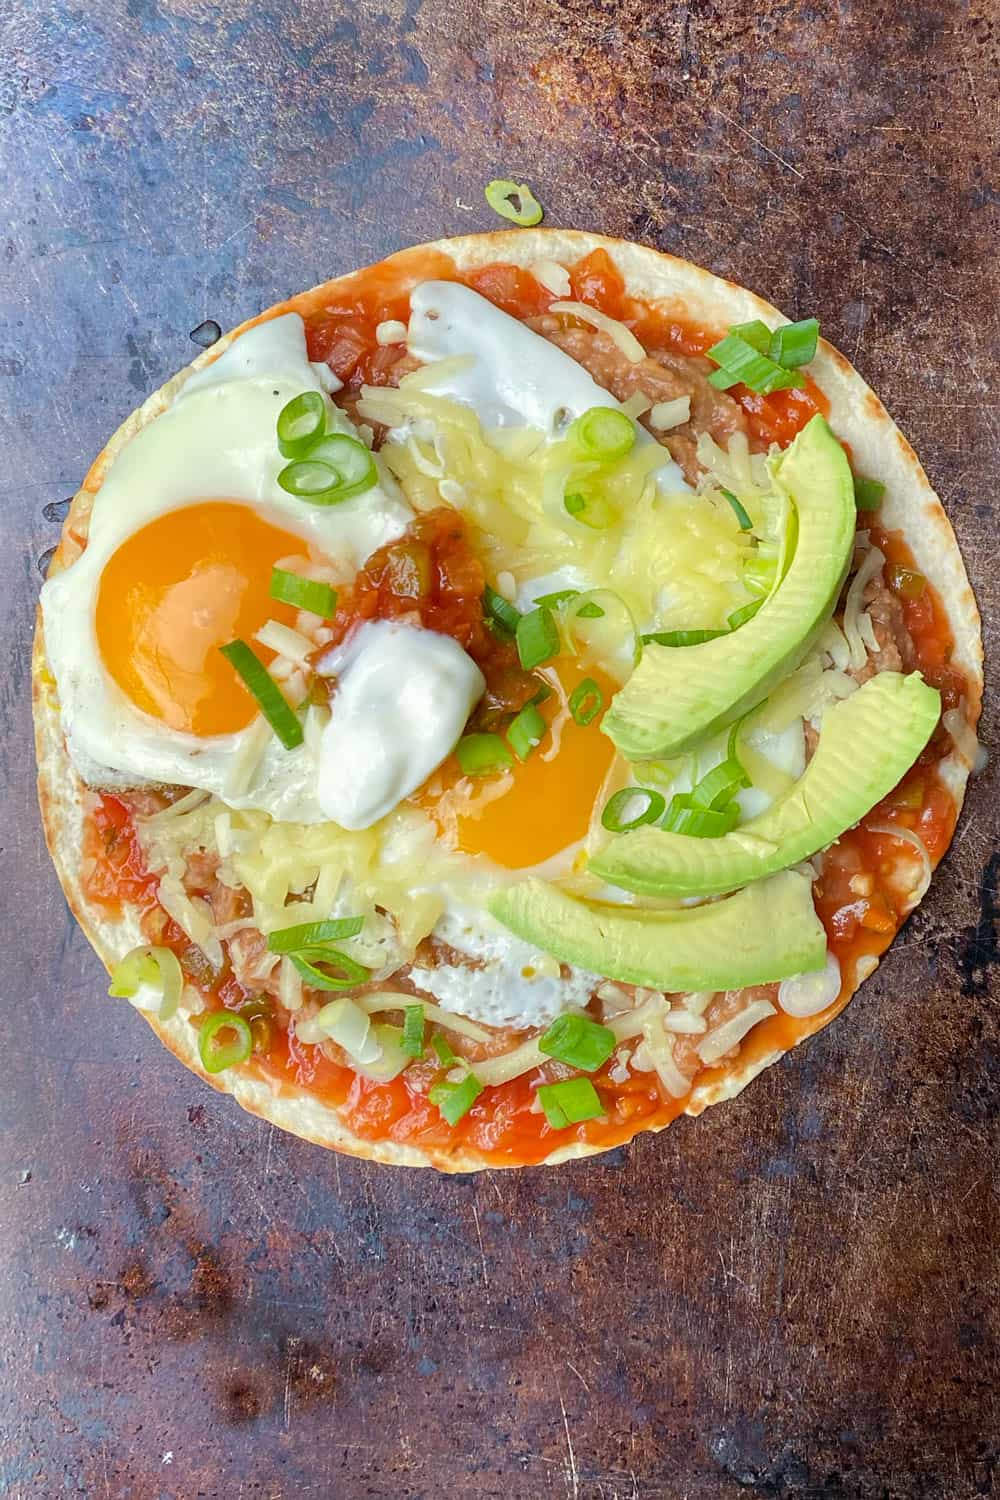 huevos rancheros on a copper colored baking sheet: a flour tortilla topped with salsa, refried beans, two fried eggs, shredded cheese and three slices of avocado